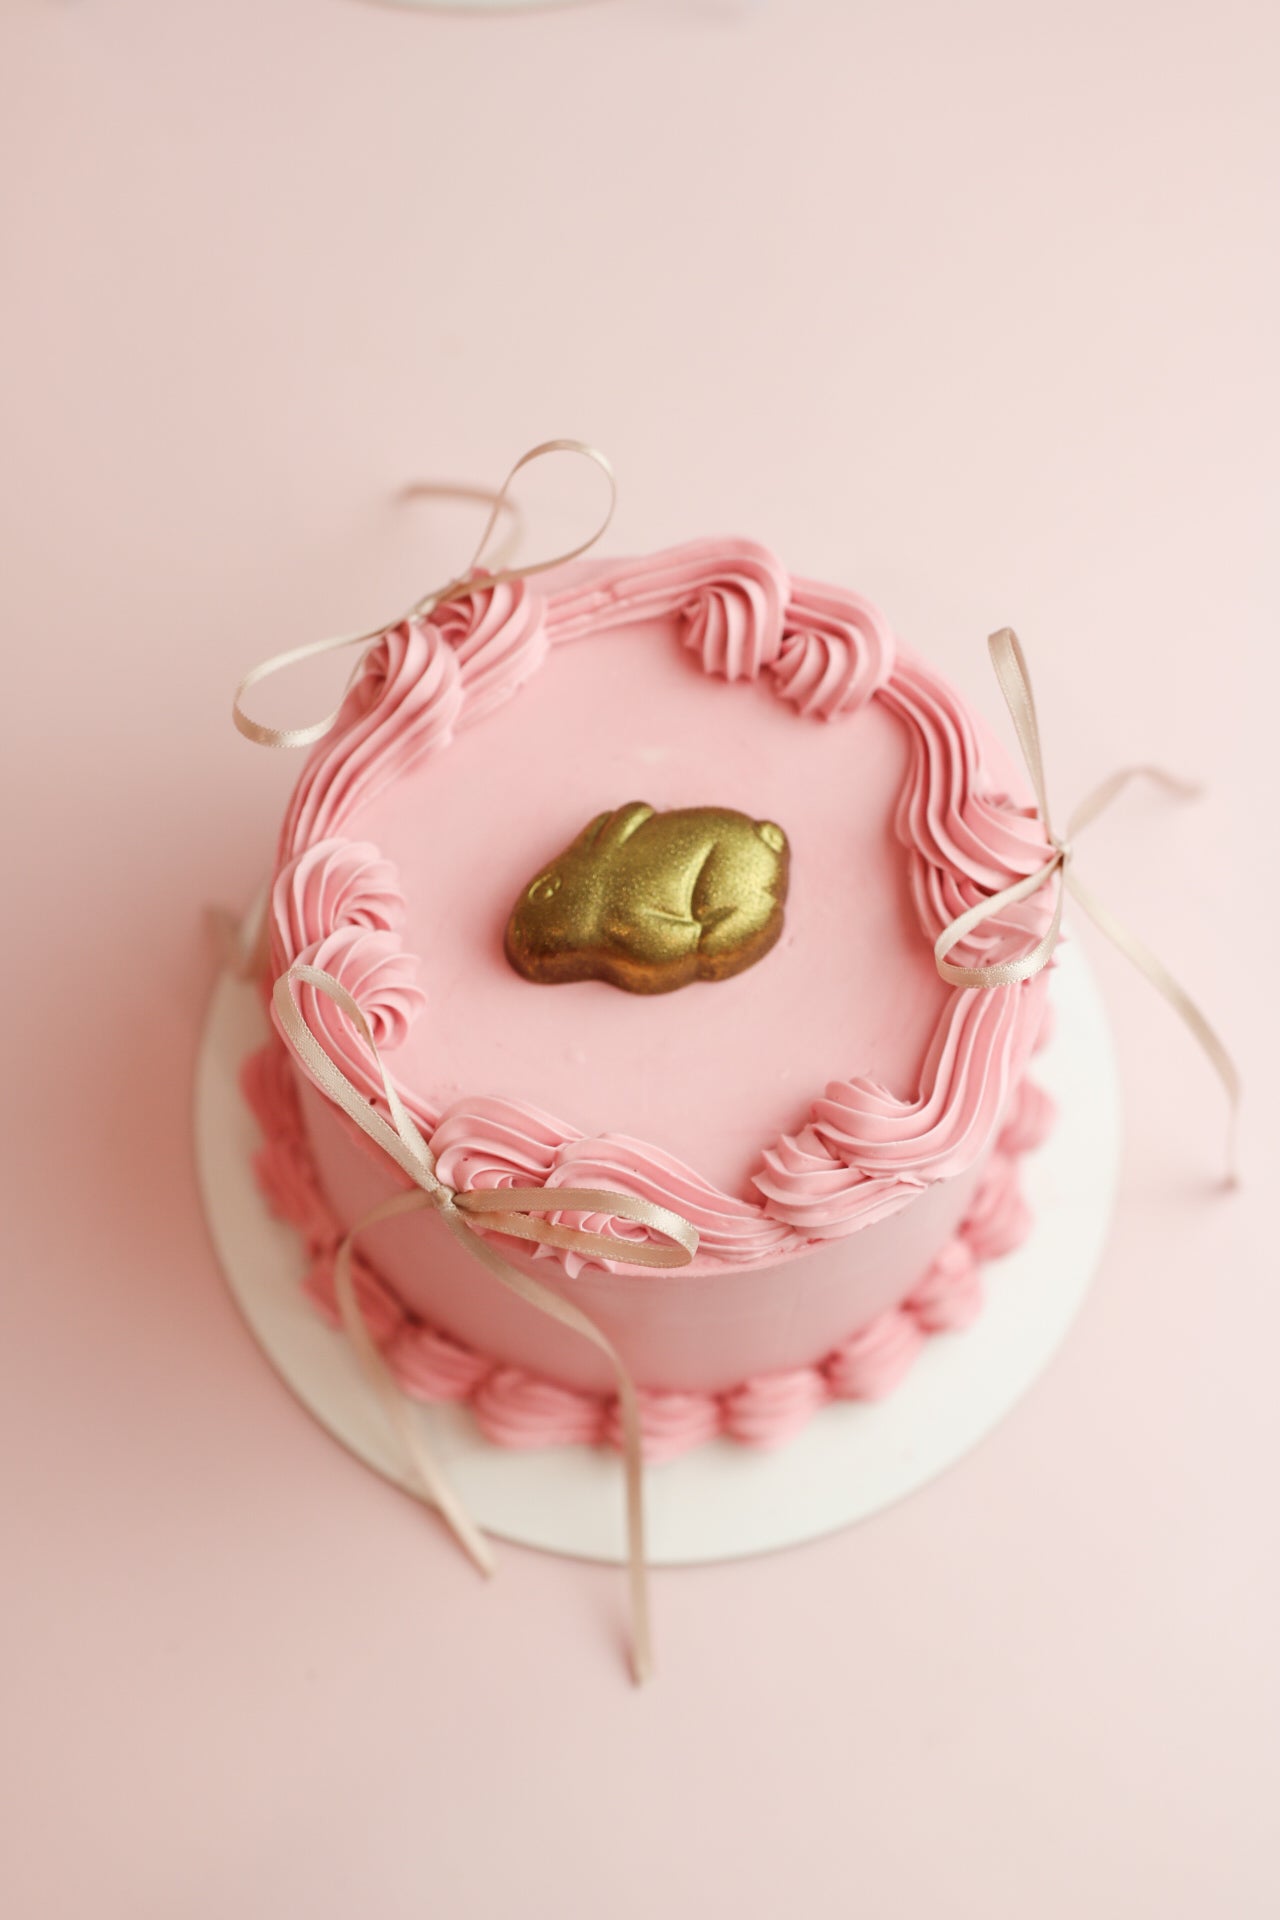 Rose easter cake with rose cream decor and a golden bunny on top of it